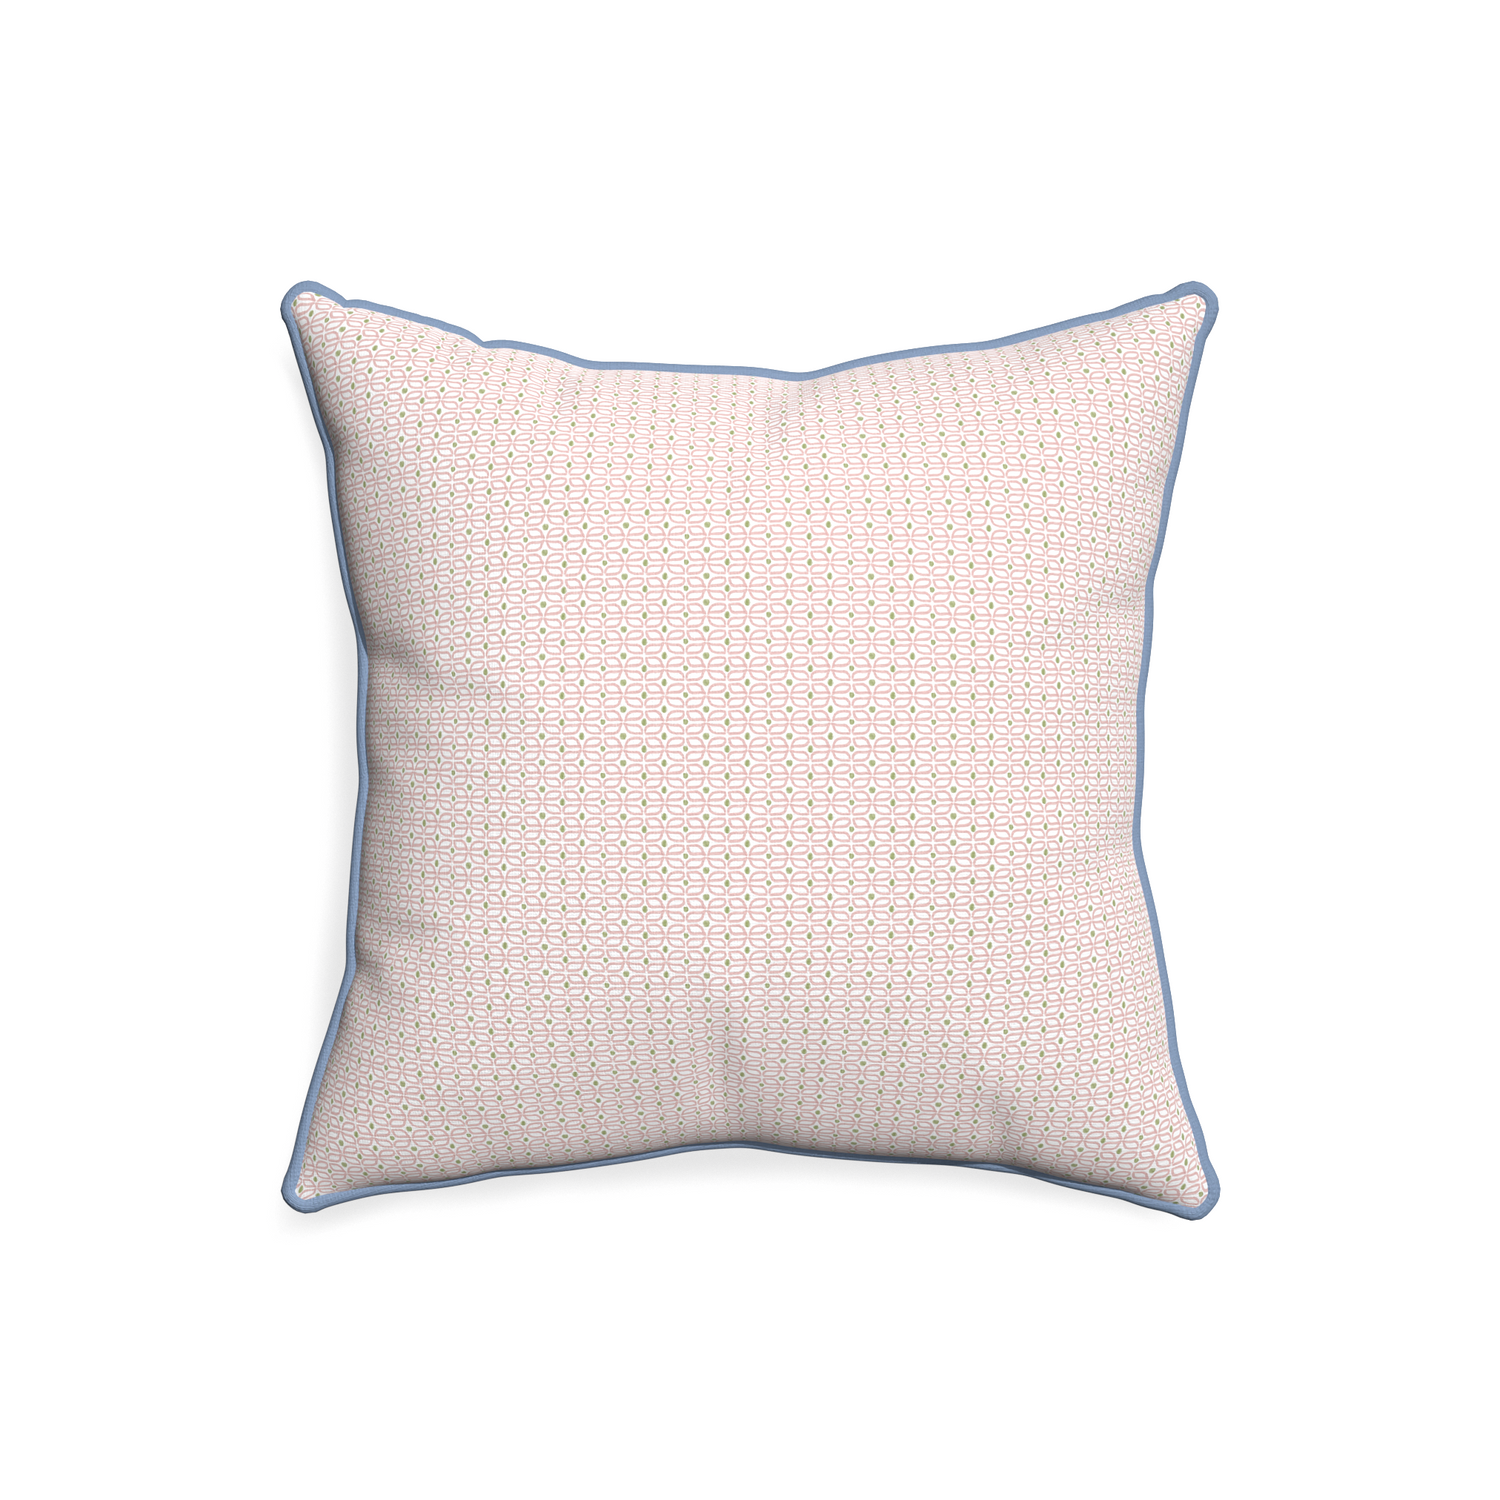 20-square loomi pink custom pillow with sky piping on white background